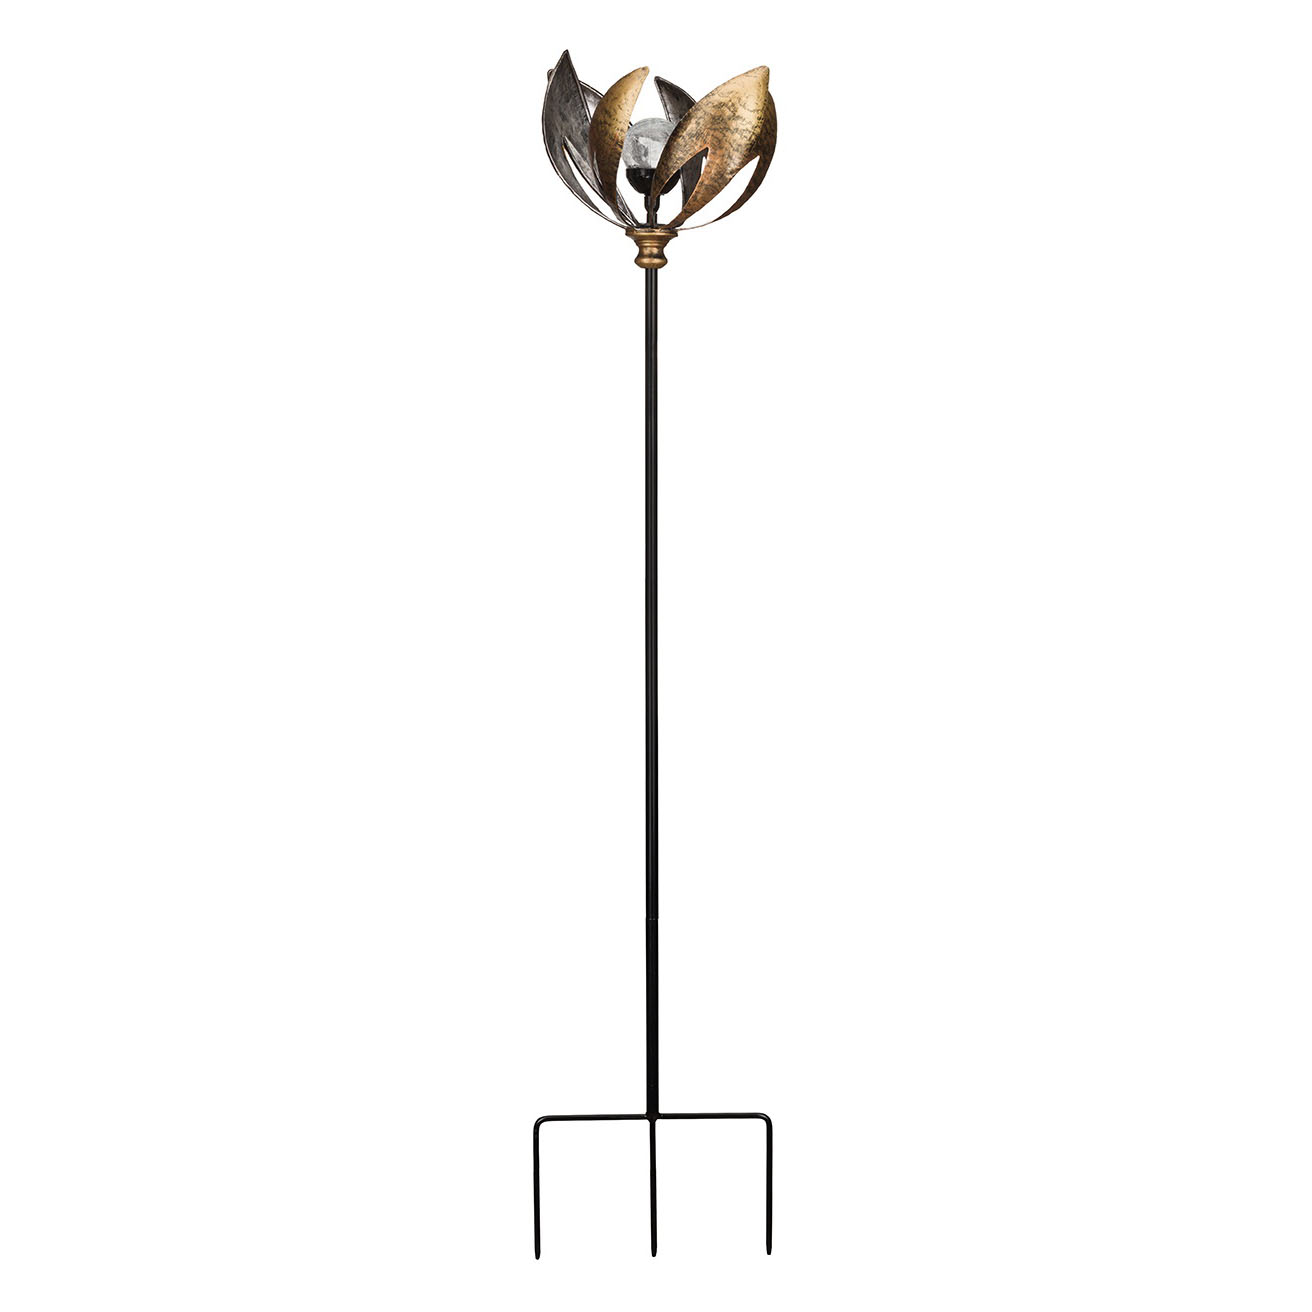 Regal Art & Gift 12749 Wind Spinner, 13 in H, Glass/Metal, Powder Coated, Galvanized/Gold - 1